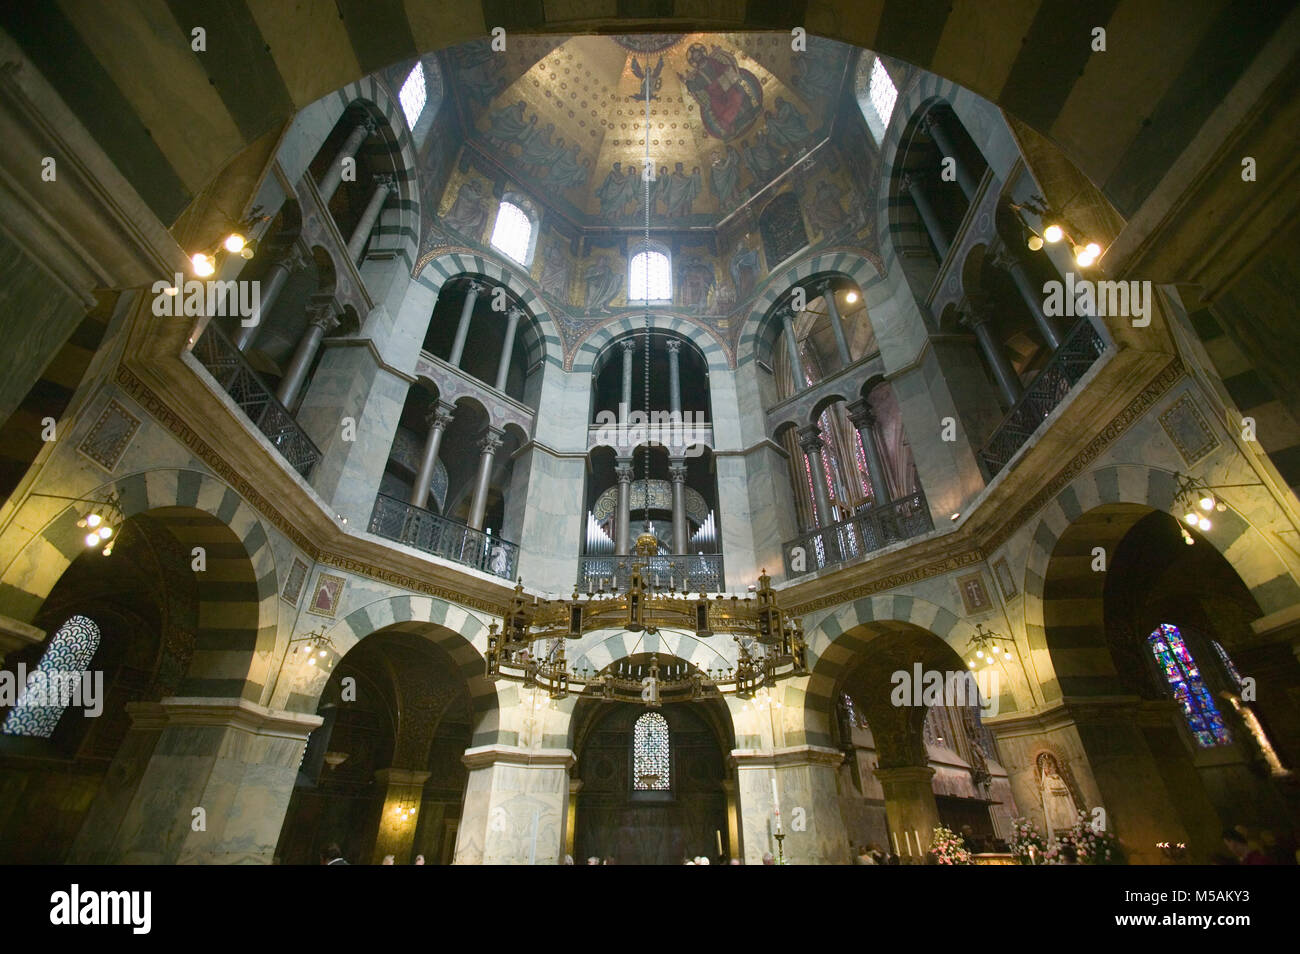 Aachen Cathedral, Aachen or Aix-la-Chapelle, North Rhine-Westphalia, Germany Stock Photo